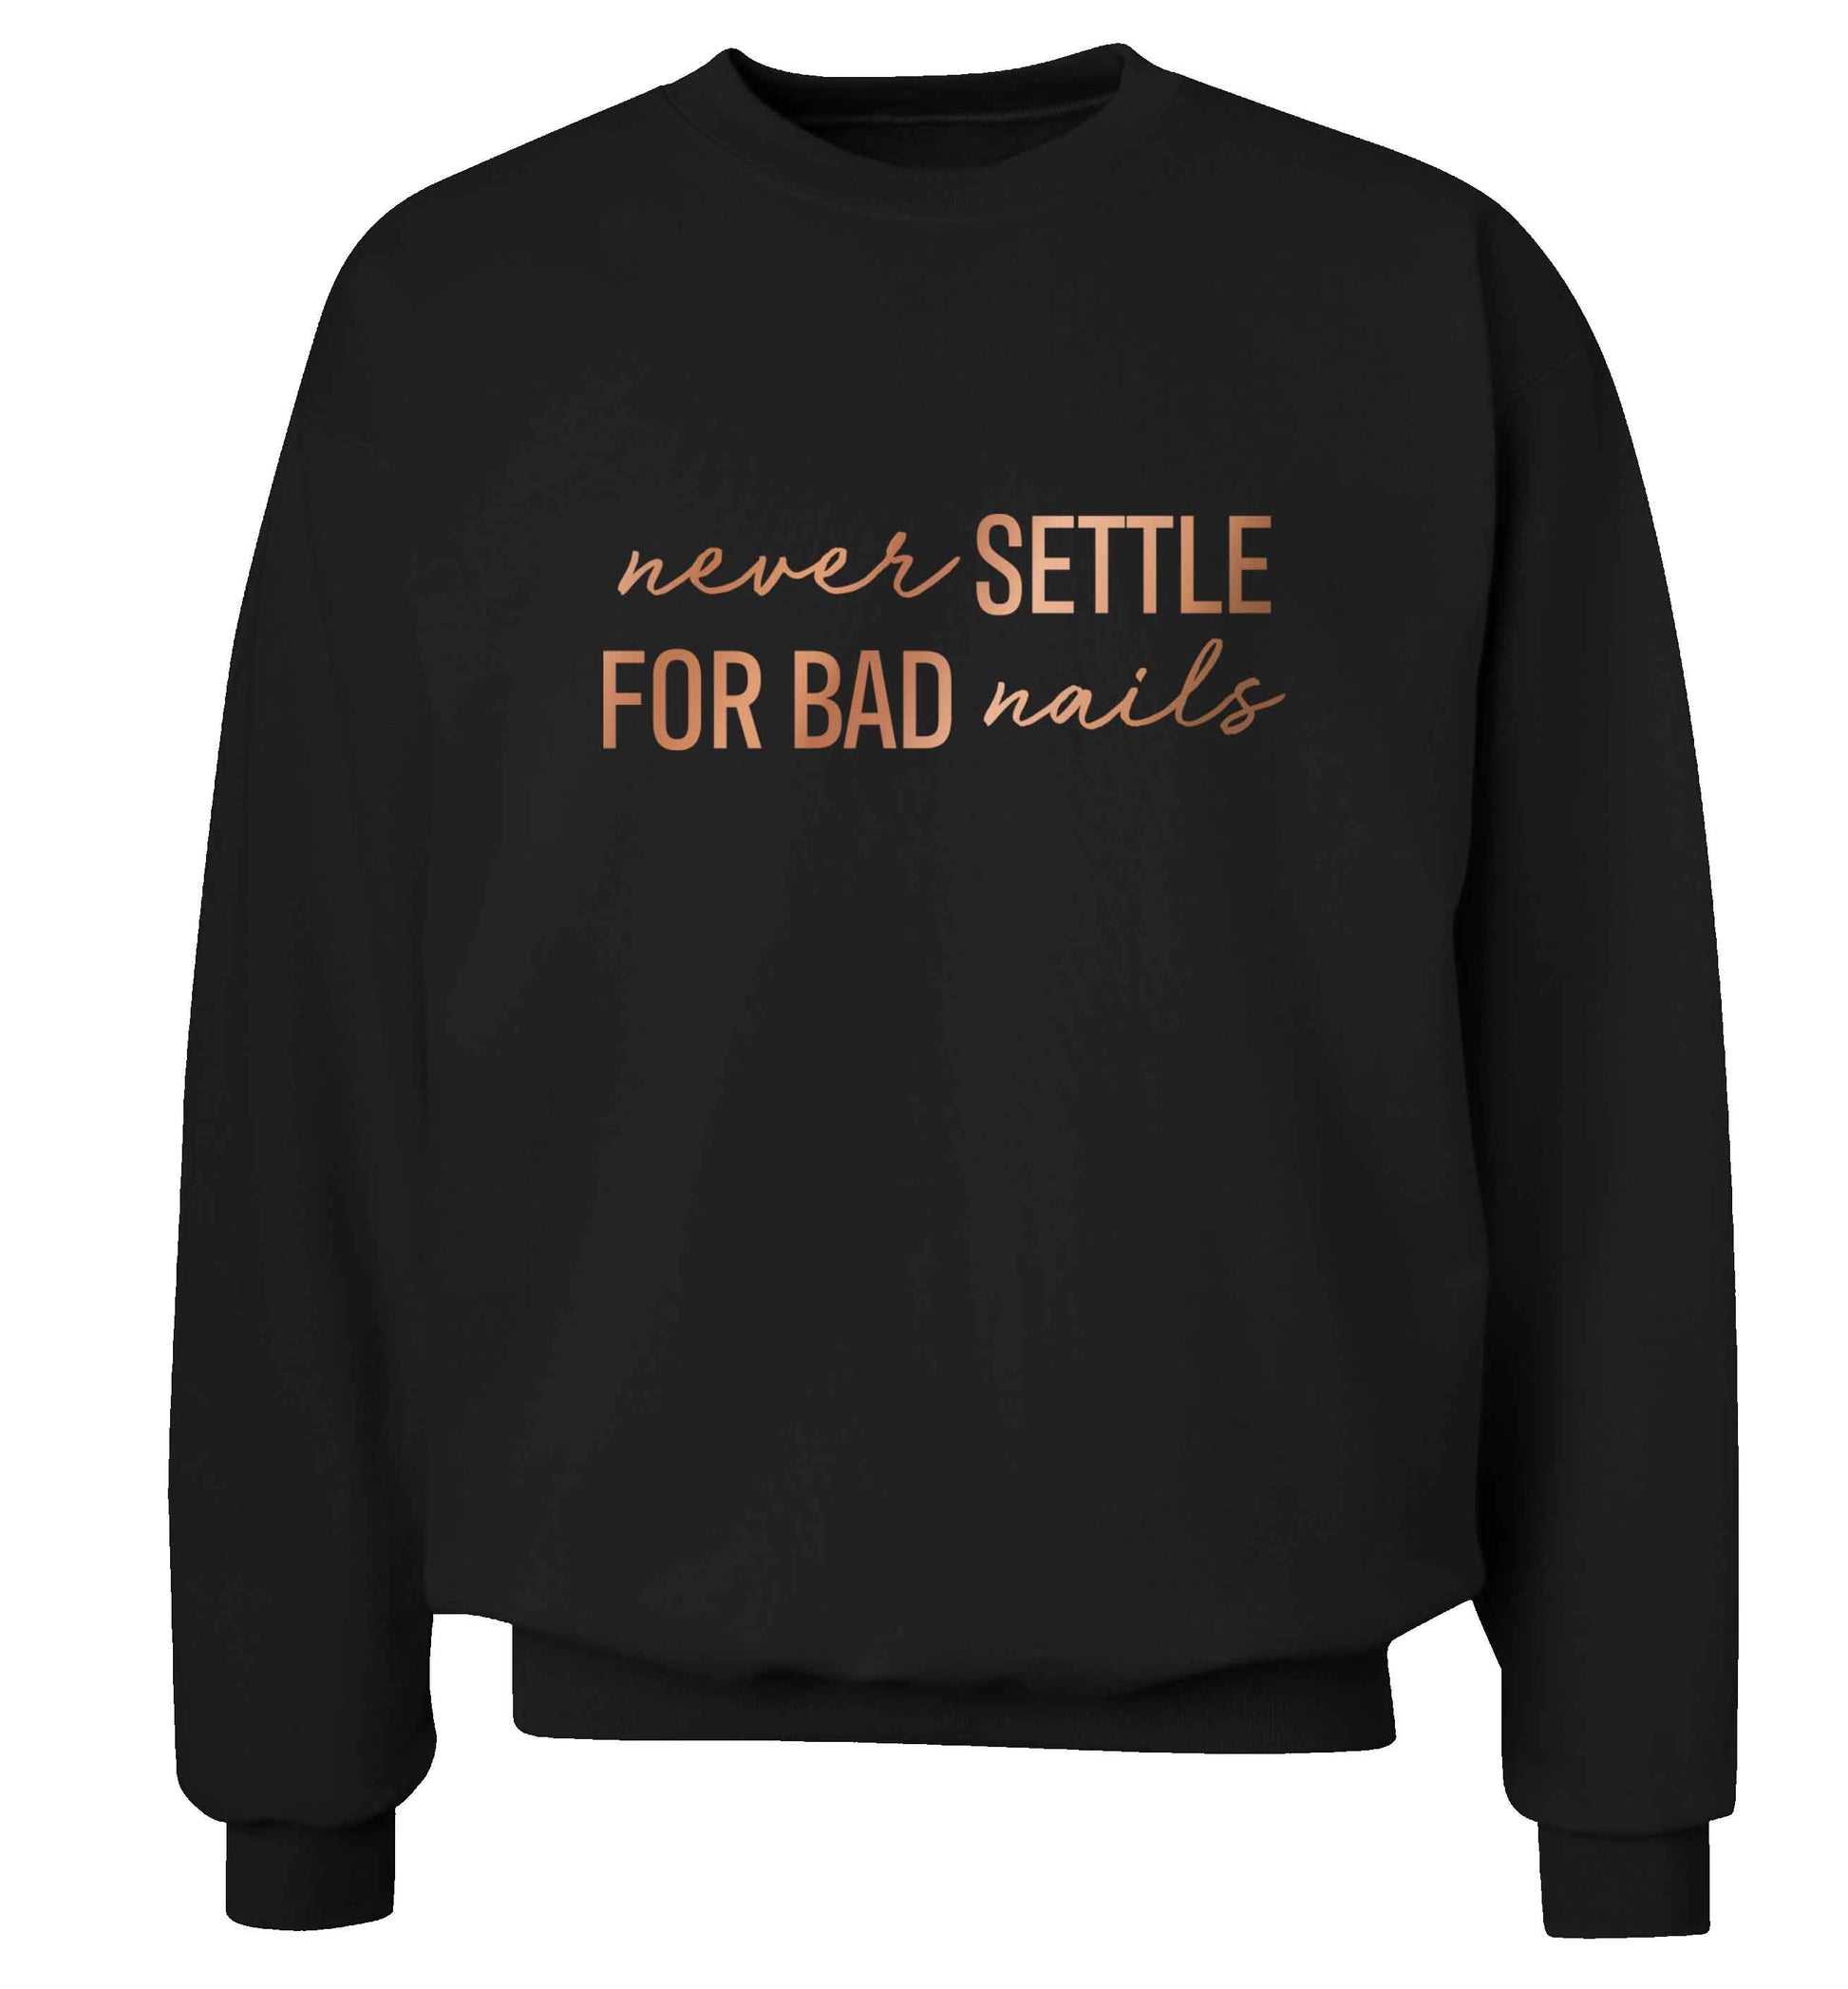 Never settle for bad nails - rose gold adult's unisex black sweater 2XL